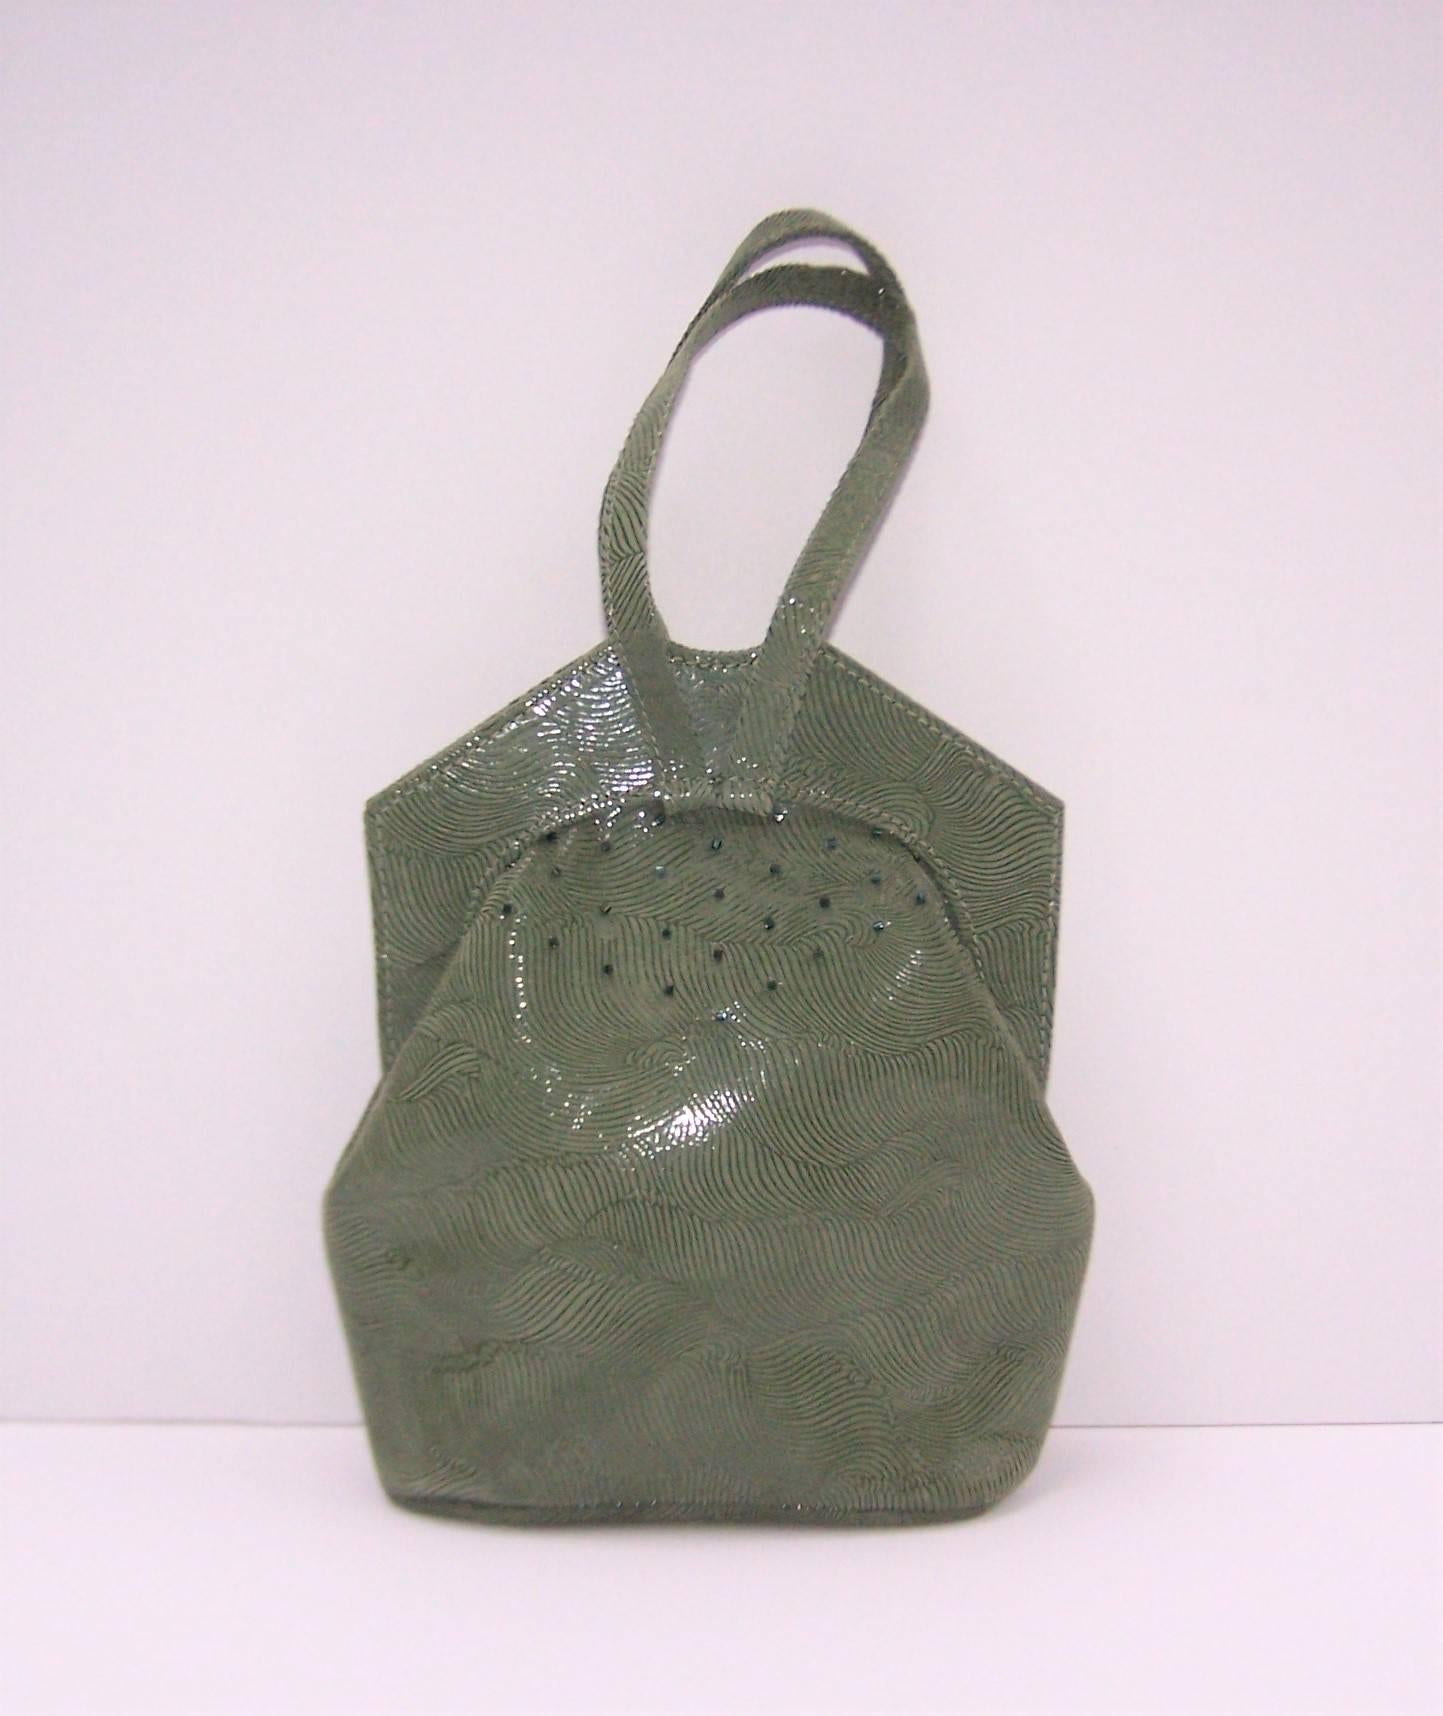 Michelle & Michael LaLonde create wearable art handbags featuring sophisticated design and unique details.  This sage green suede leather handbag is silk screen printed to create a design that catches the light and mimics a wave pattern.  The top of